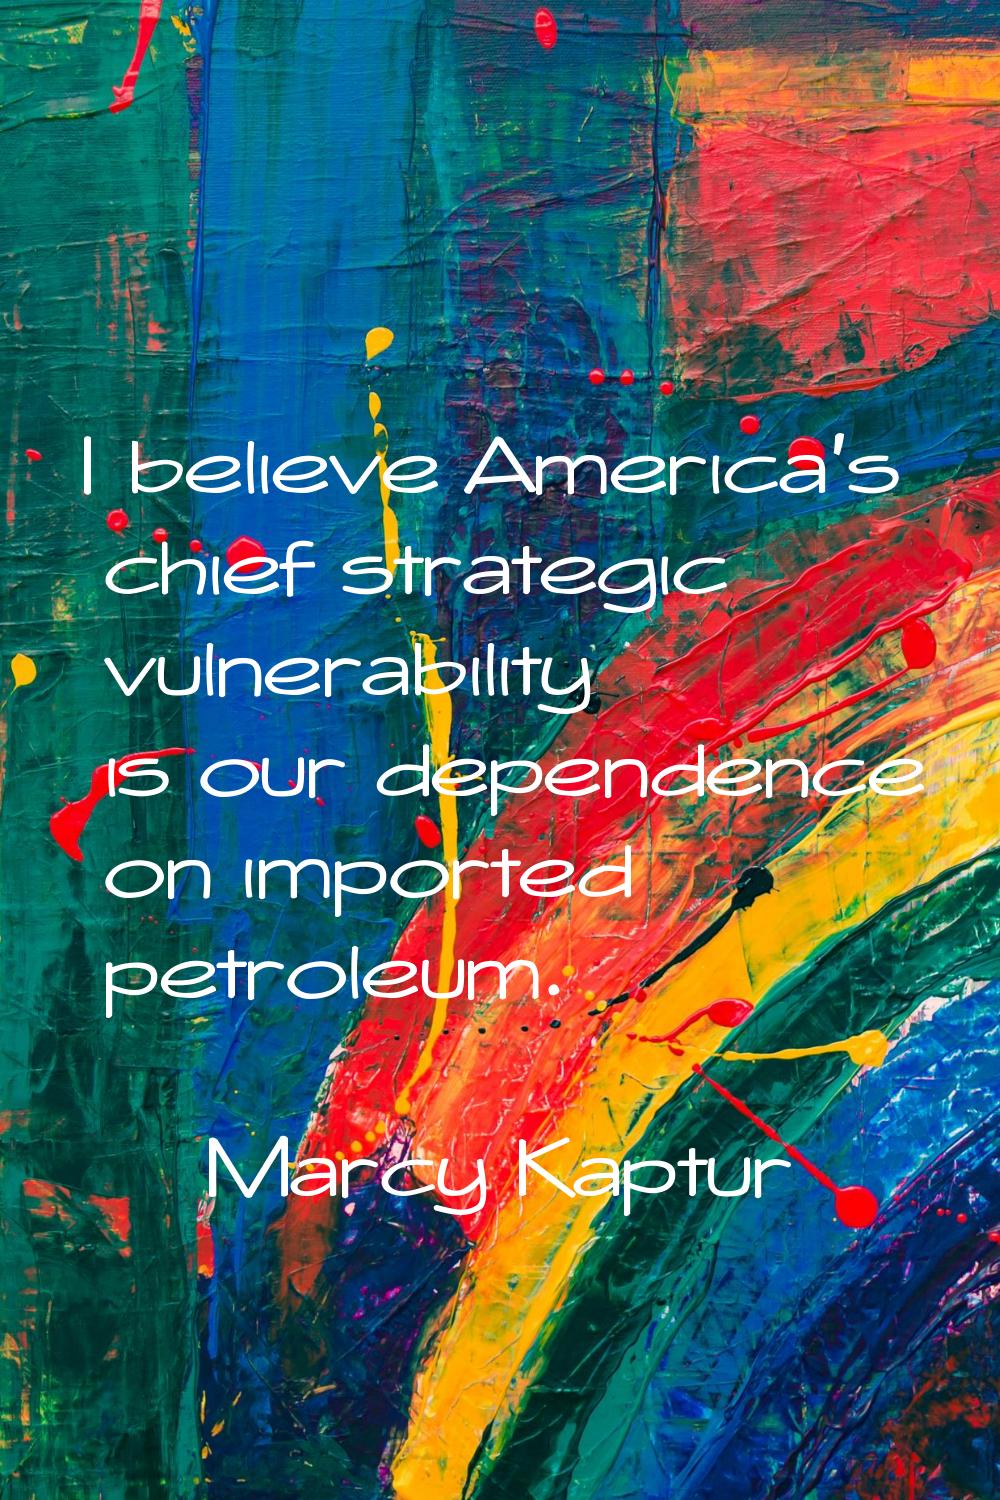 I believe America's chief strategic vulnerability is our dependence on imported petroleum.